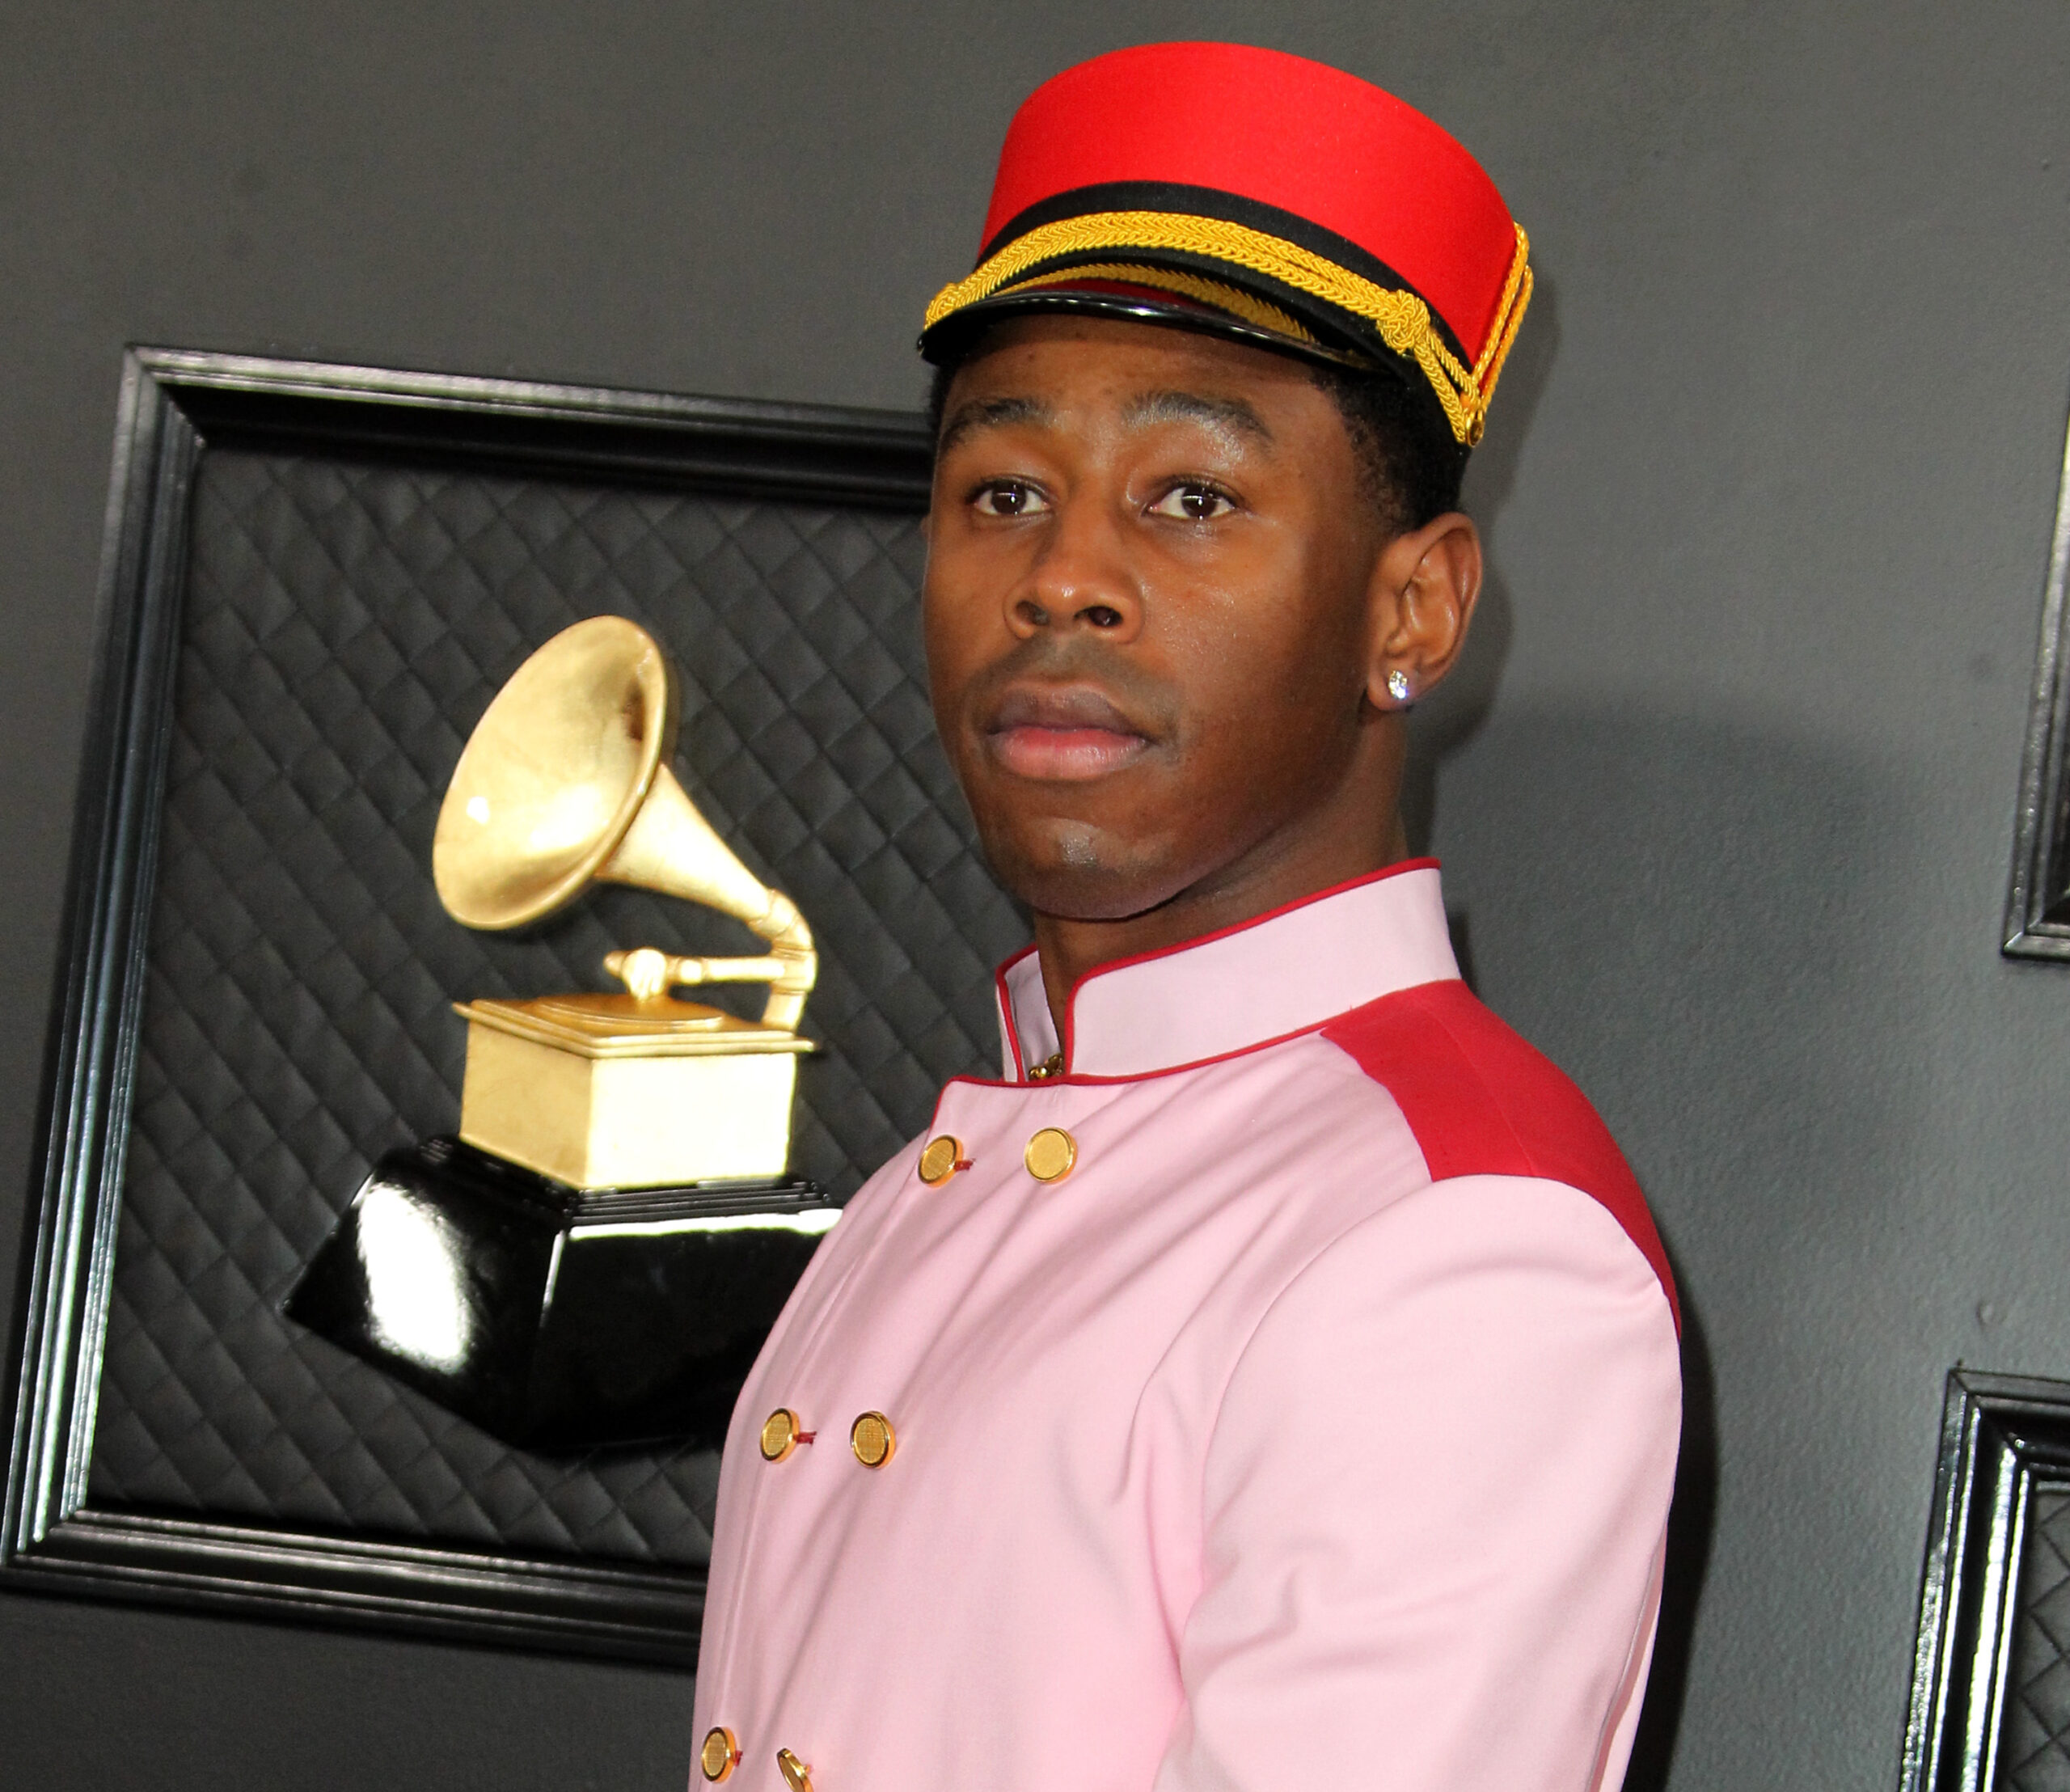 Do you like it? Tyler The Creator rocks leopard hair on the Grammys red  carpet. #TylerTheCreator #Grammys